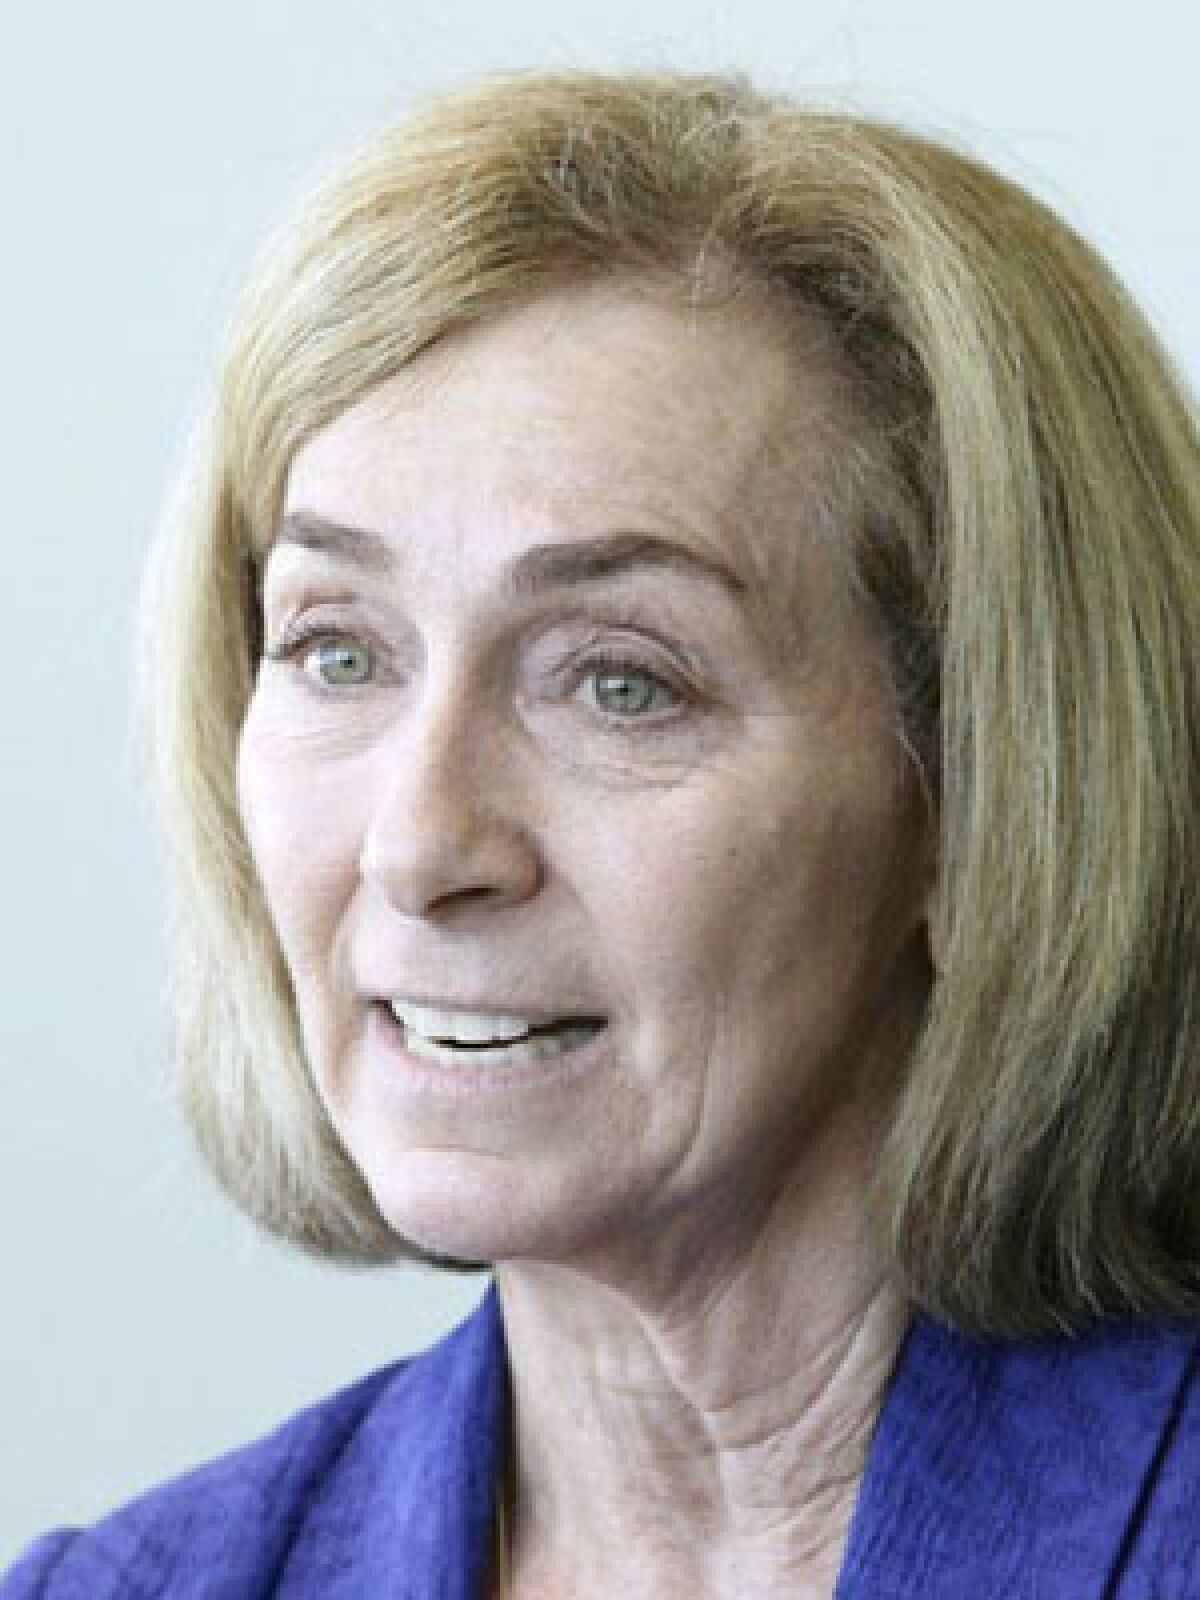 Ann Ravel, the chairwoman of the California Fair Political Practices Commission, said she rightfully earned her pension after working as an attorney for Santa Clara County, whose retirement benefits come from CalPERS, from 1976 until her retirement in 2009.